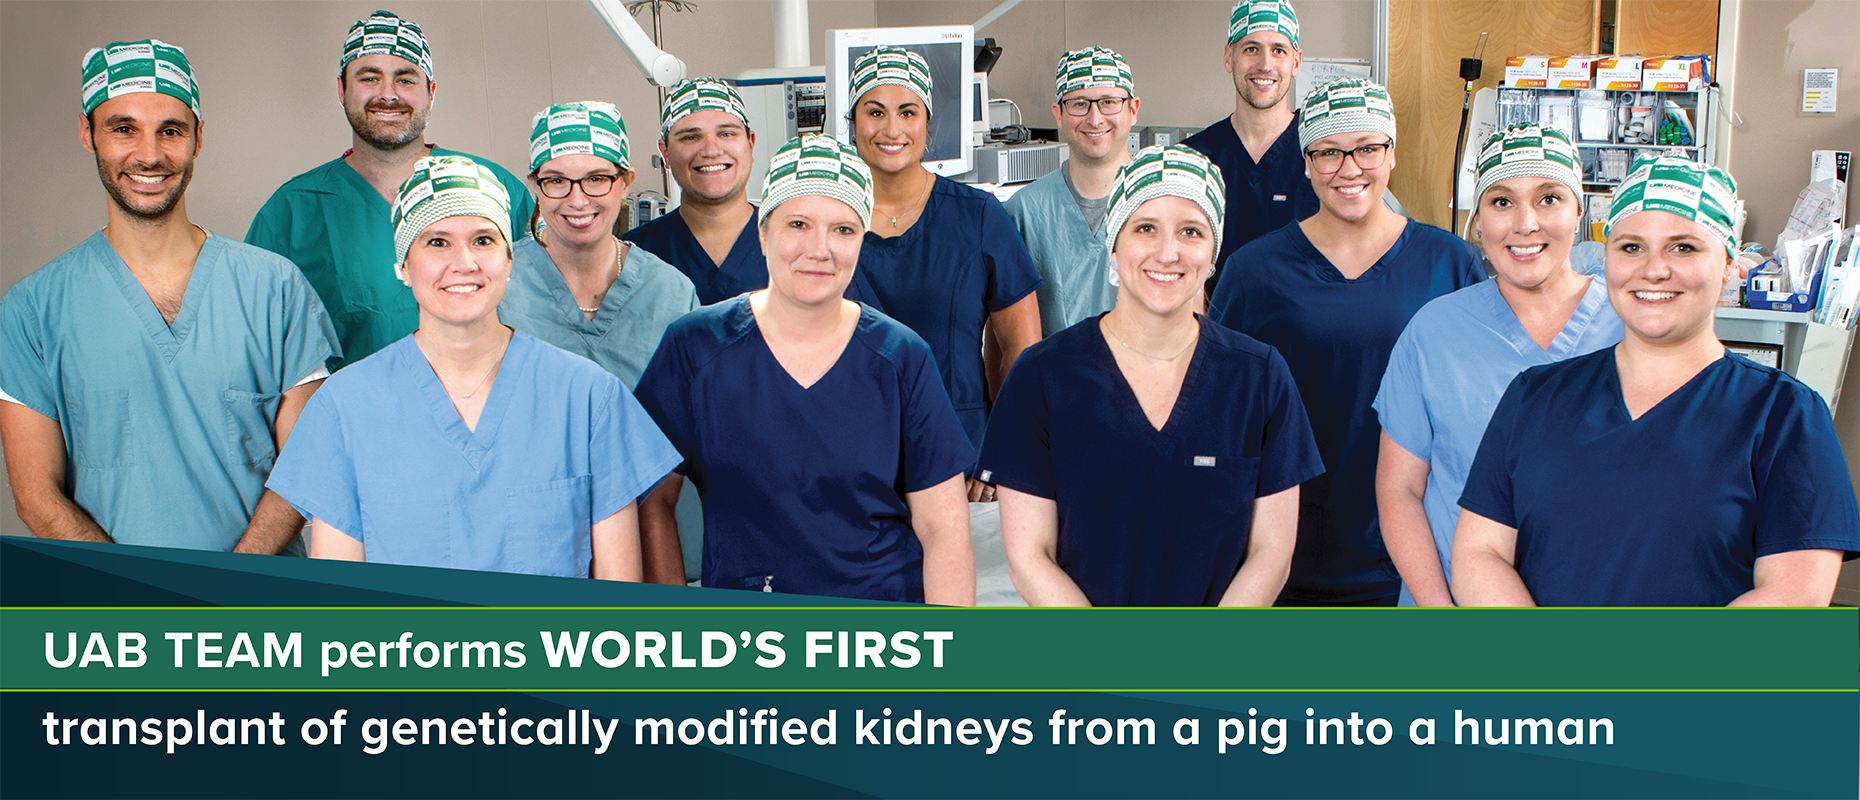 UAB team performs world's first transplant of genetically modified kidneys from a pig into a human